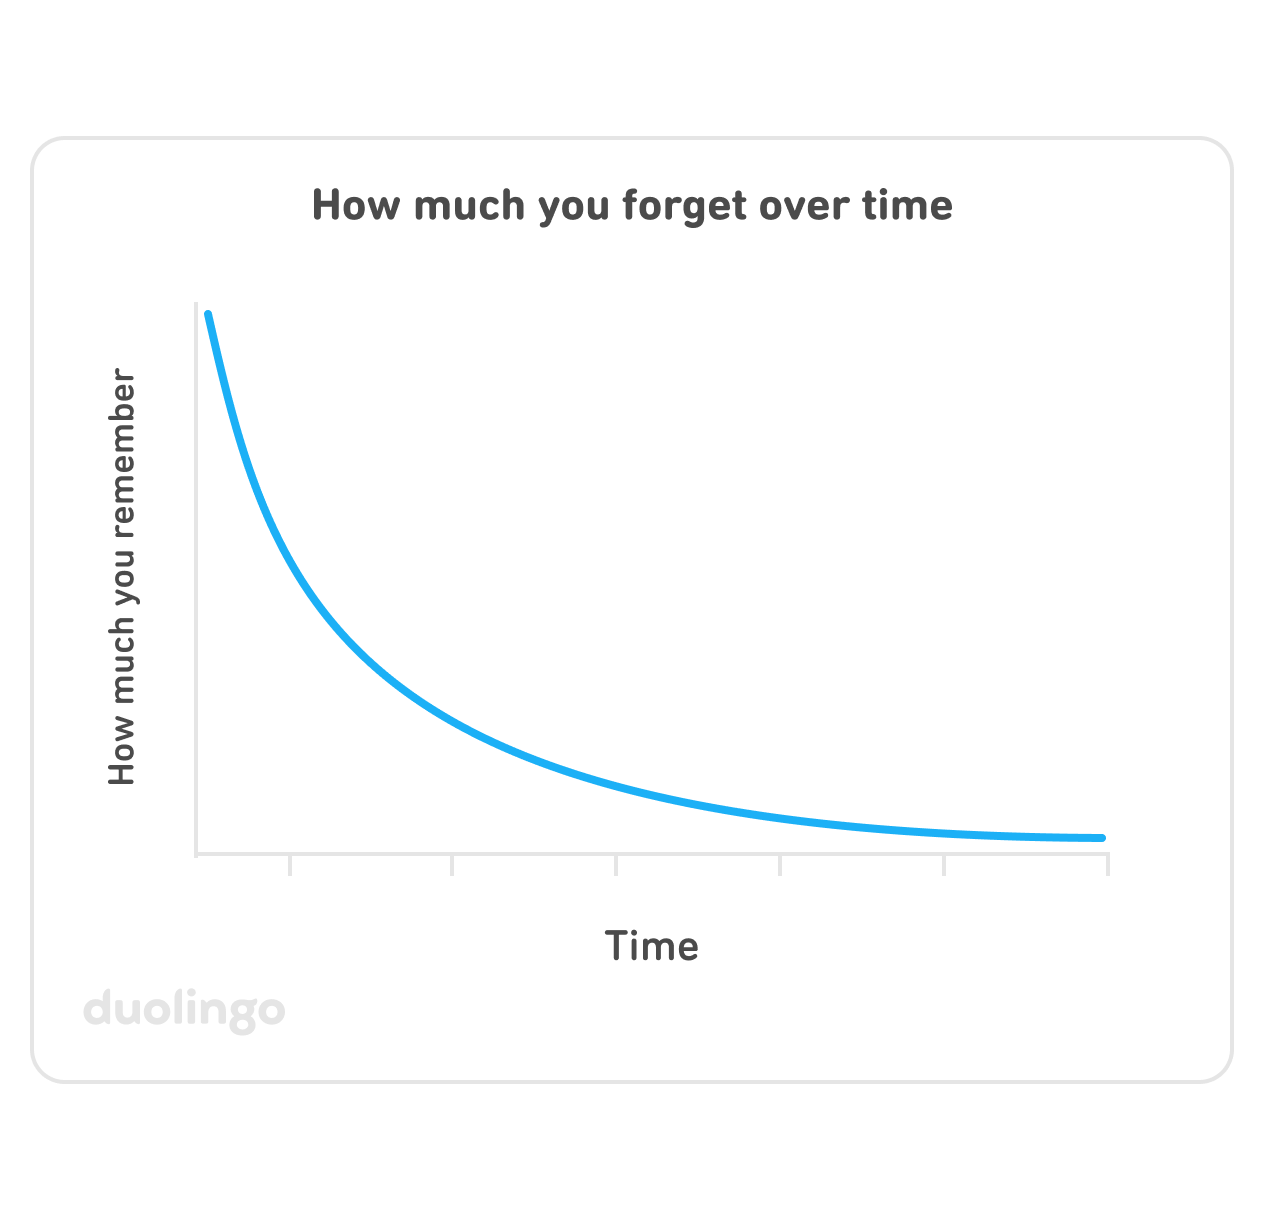 Graph of "How much you forget over time": the horizontal y-axis is time, and the vertical x-axis is how much you remember. The blue line plotting how much you remember starts high at the top left and very quickly swoops down—it reduces by half at each time interval.